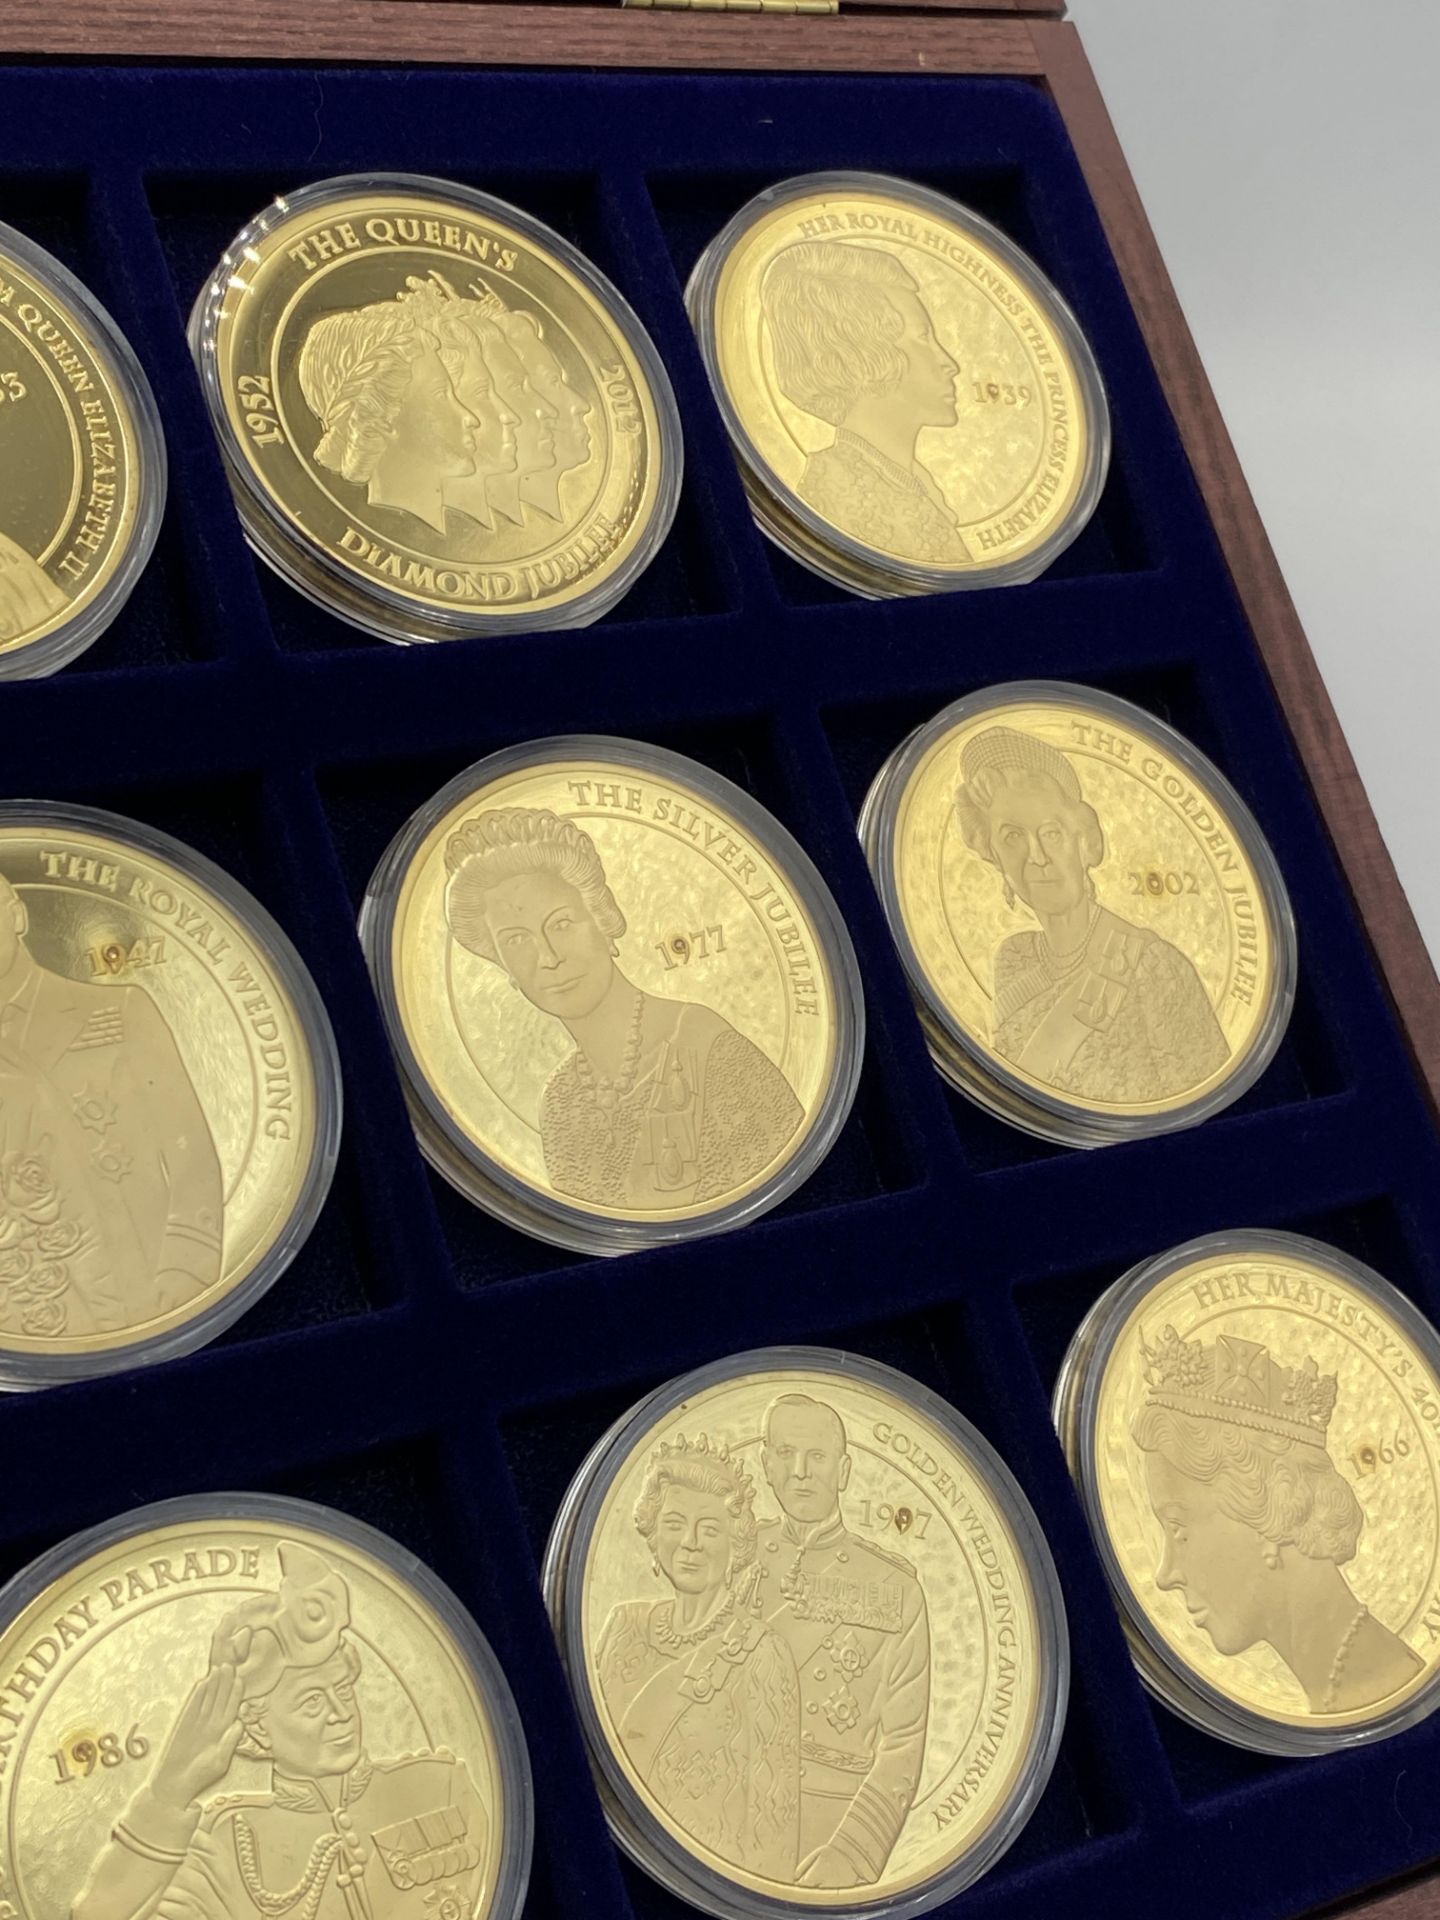 Twelve gold plated Portraits of the Queen Diamond Jubilee coins in presentation box - Image 5 of 6